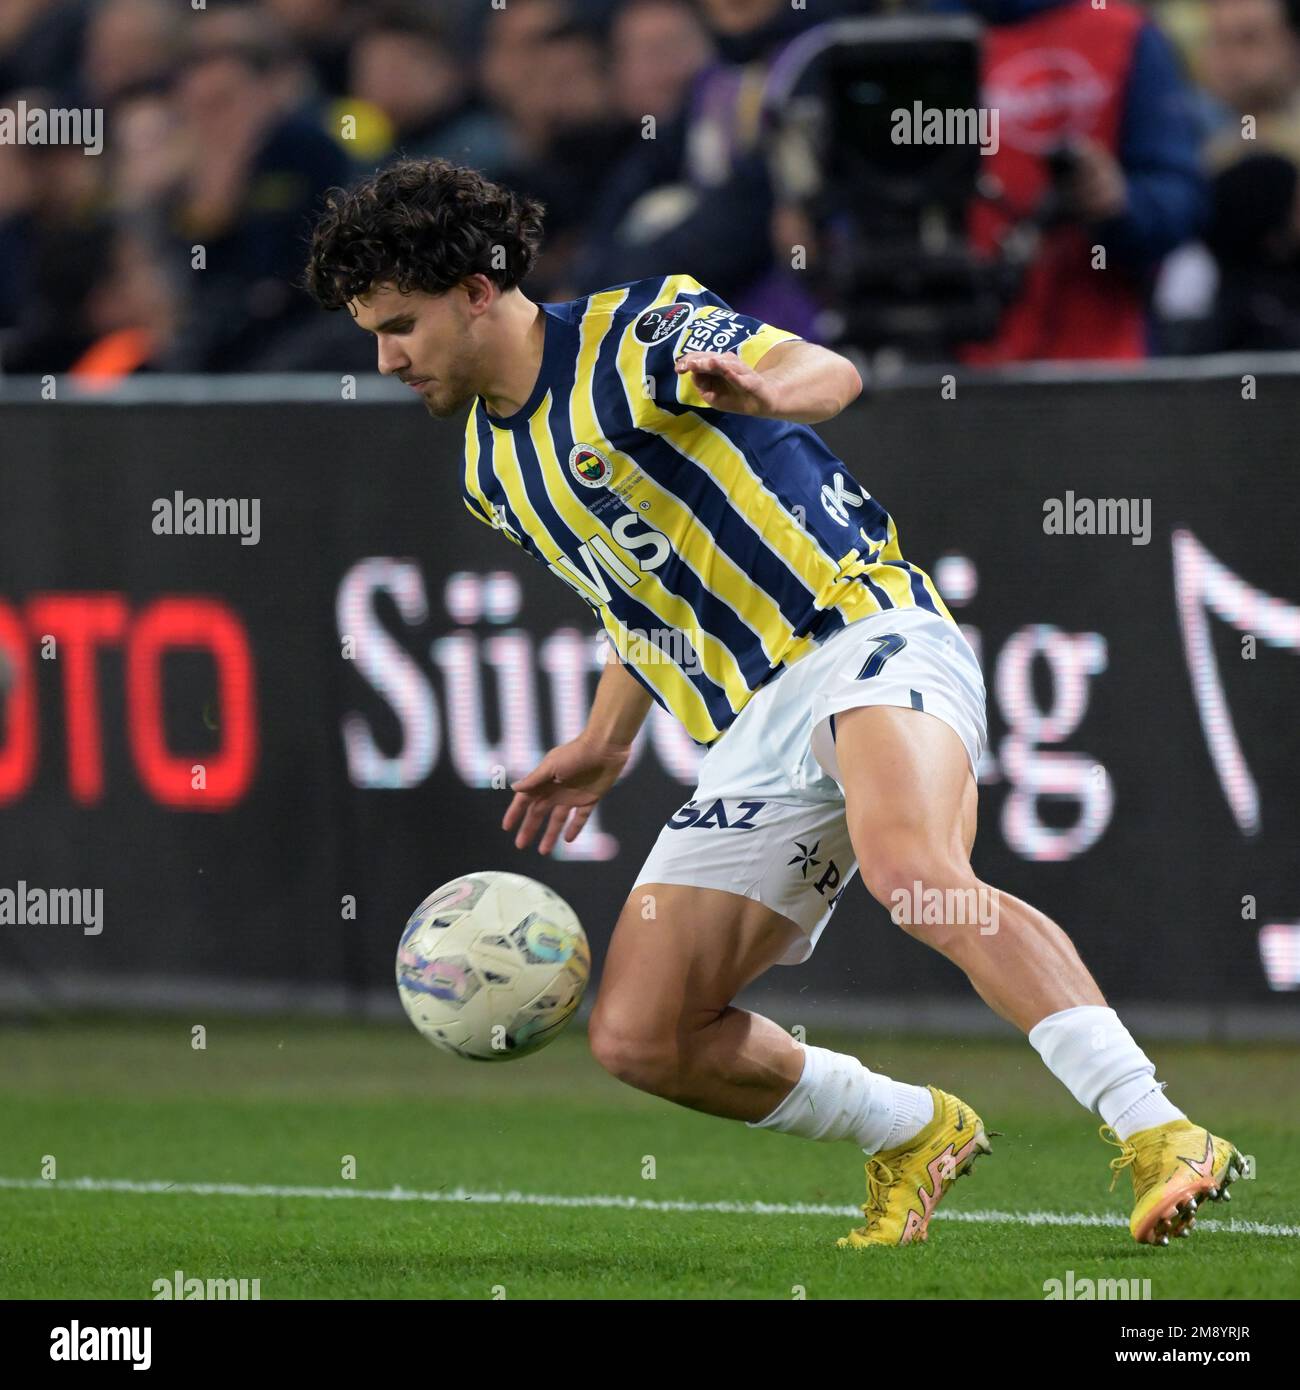 ISTANBUL - Ferdi Kadioglu of Fenerbahce SK during the Turkish Super Lig match between Fenerbahce AS and Galatasaray AS at Ulker stadium on January 8, 2023 in Istanbul, Turkey. AP | Dutch Height | GERRIT OF COLOGNE Stock Photo